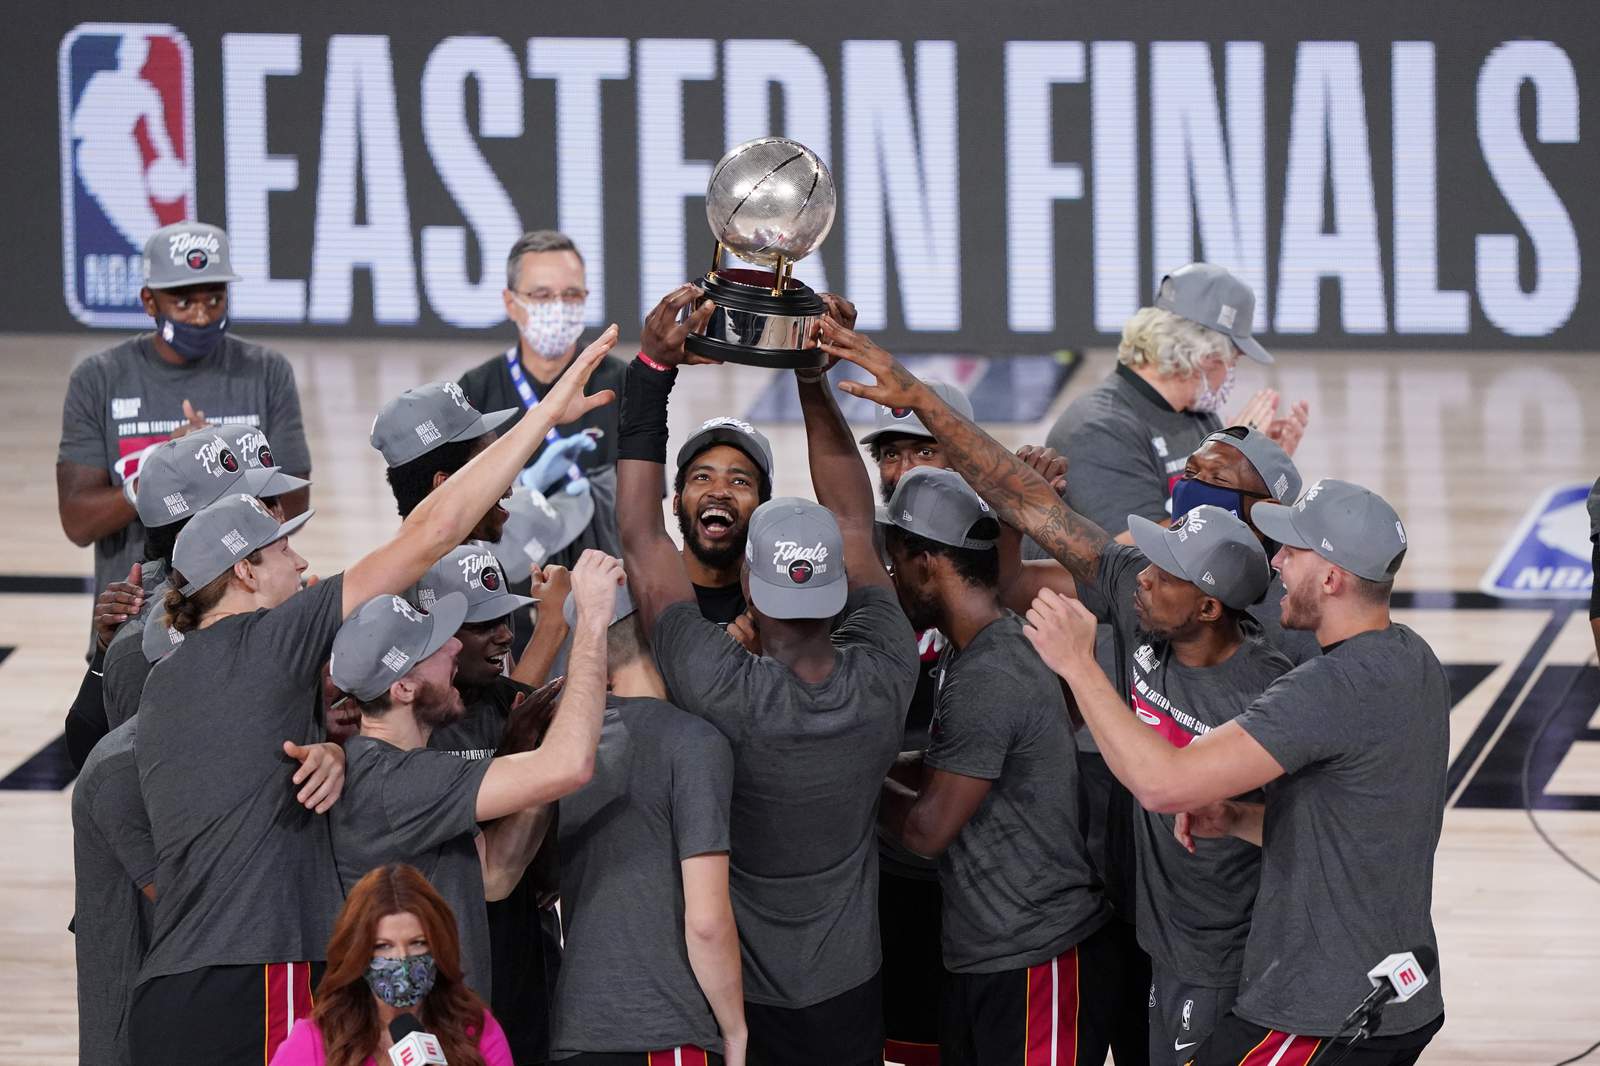 Back to the Finals: Bam Adebayo, Jimmy Butler power Heat to title series